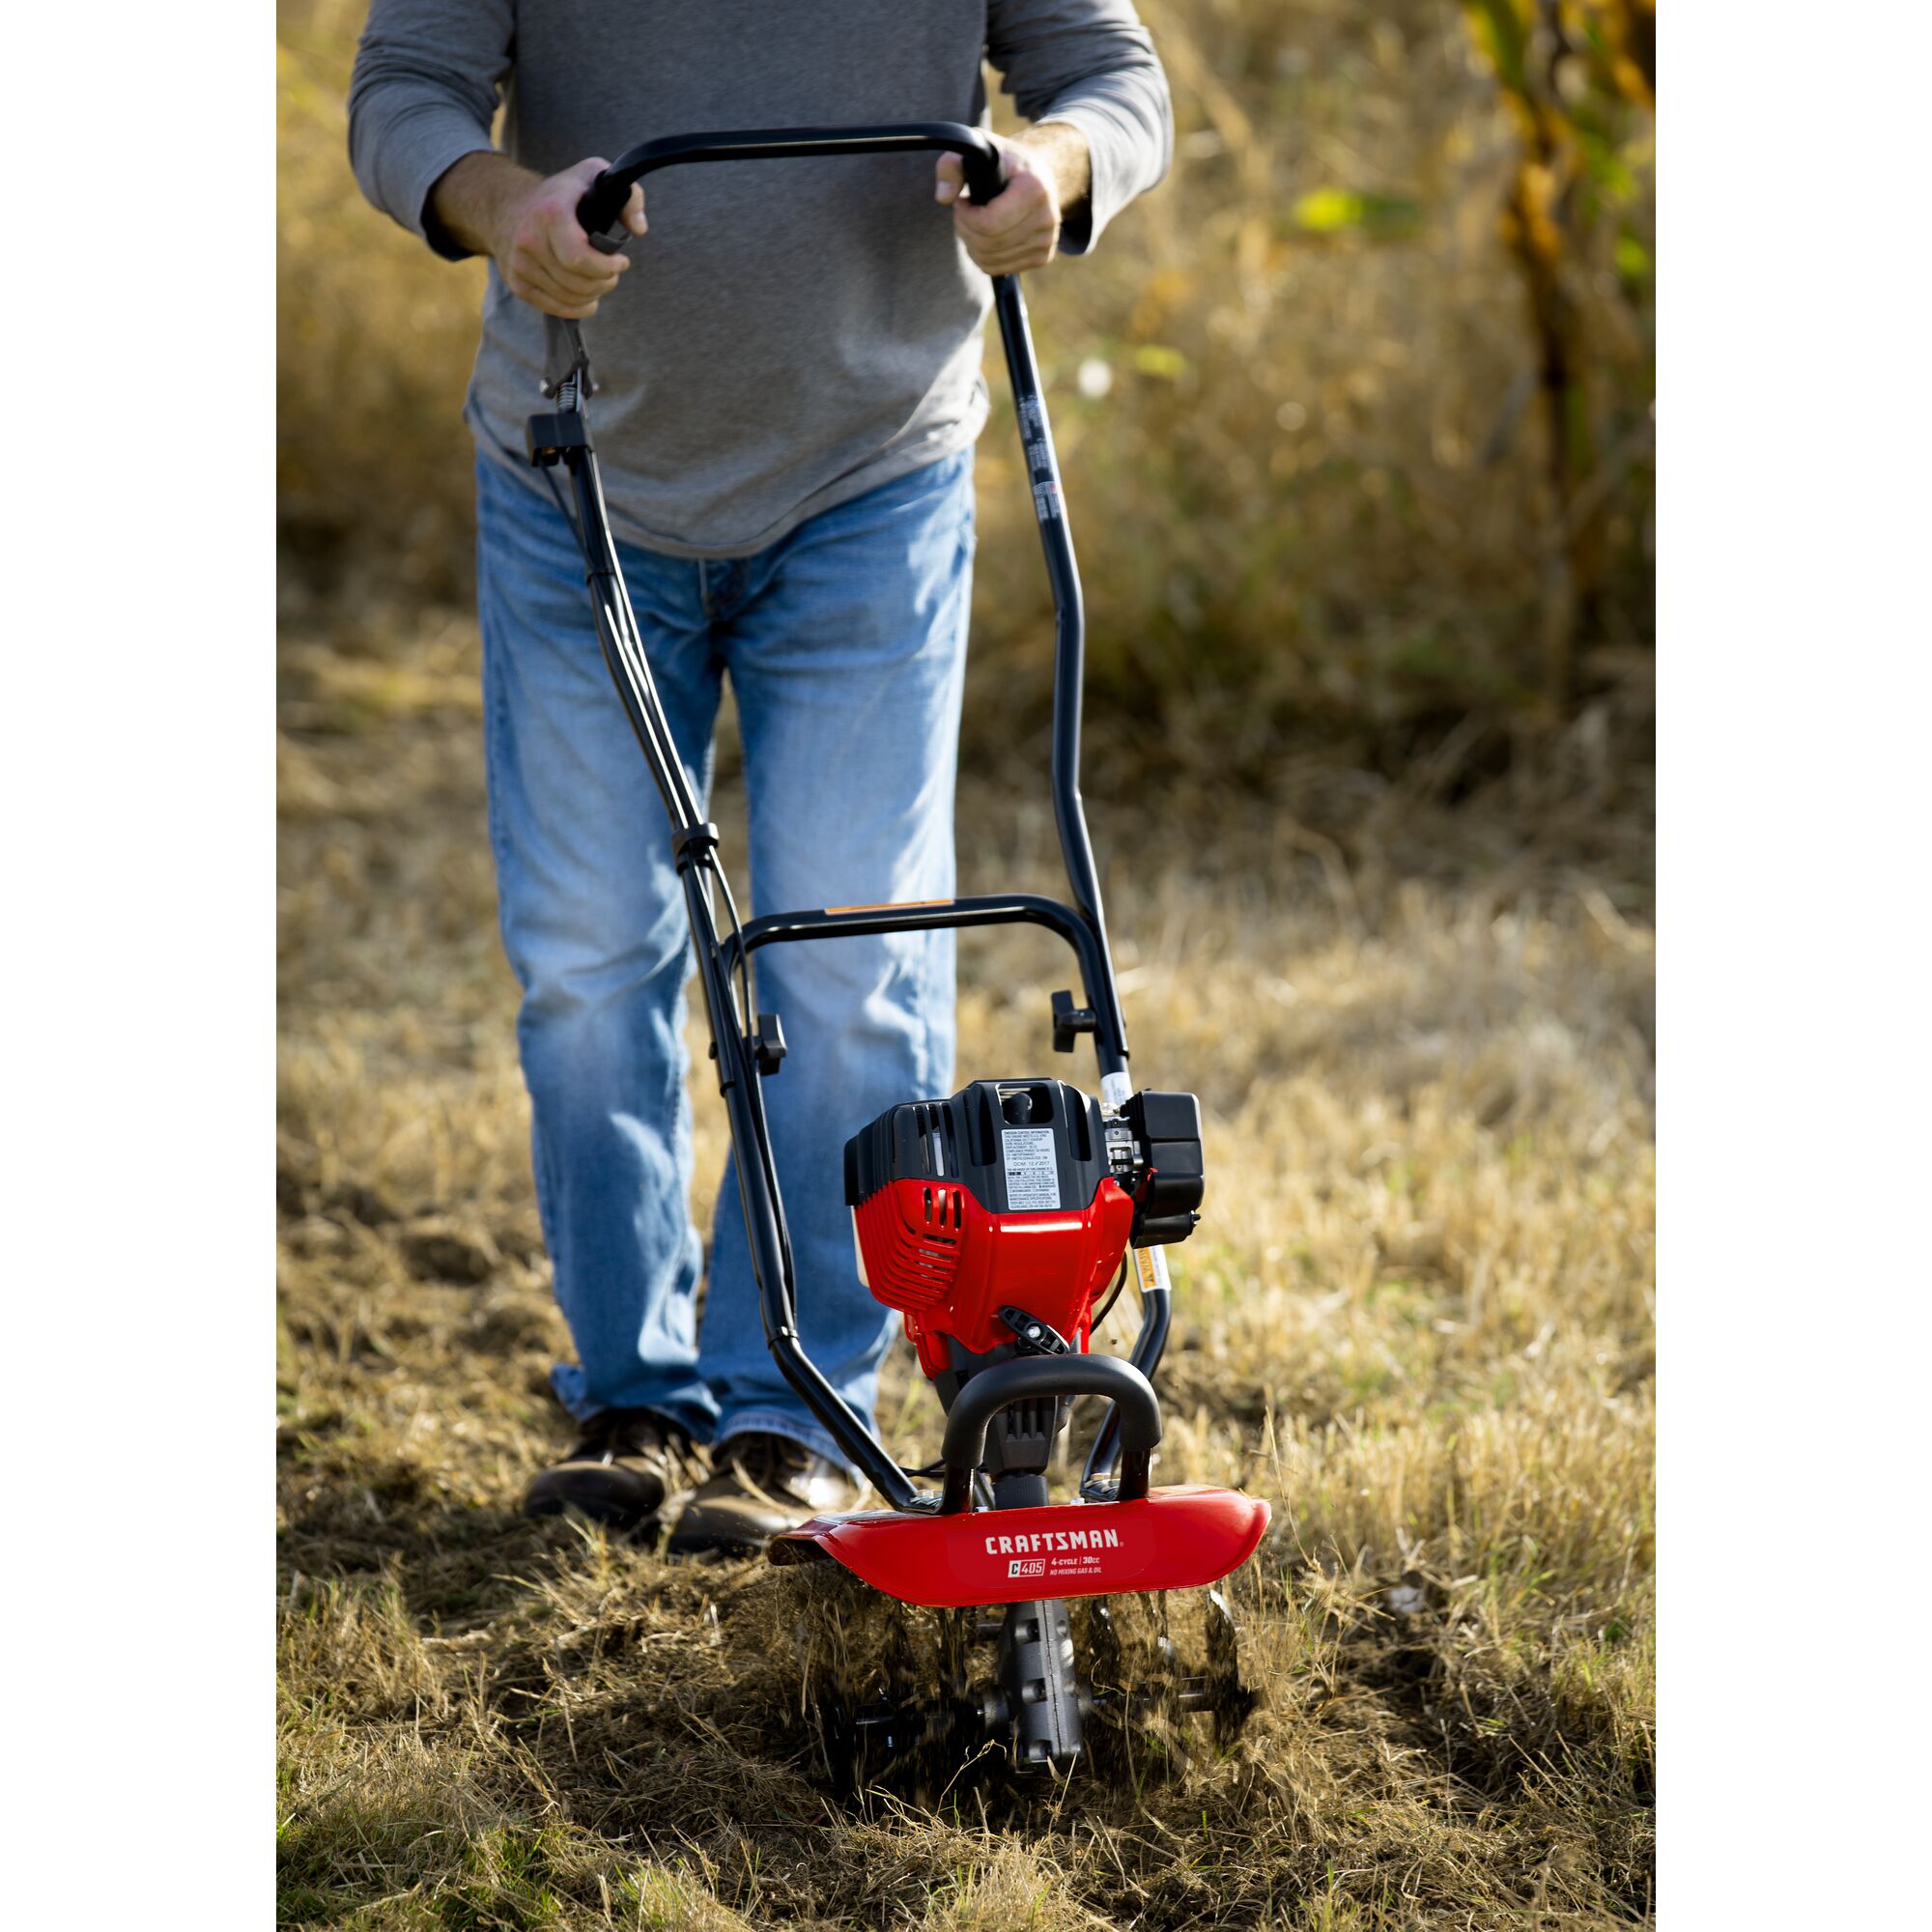 CRAFTSMAN gas cultivator in front view cultivating field in jeans and gray shirt